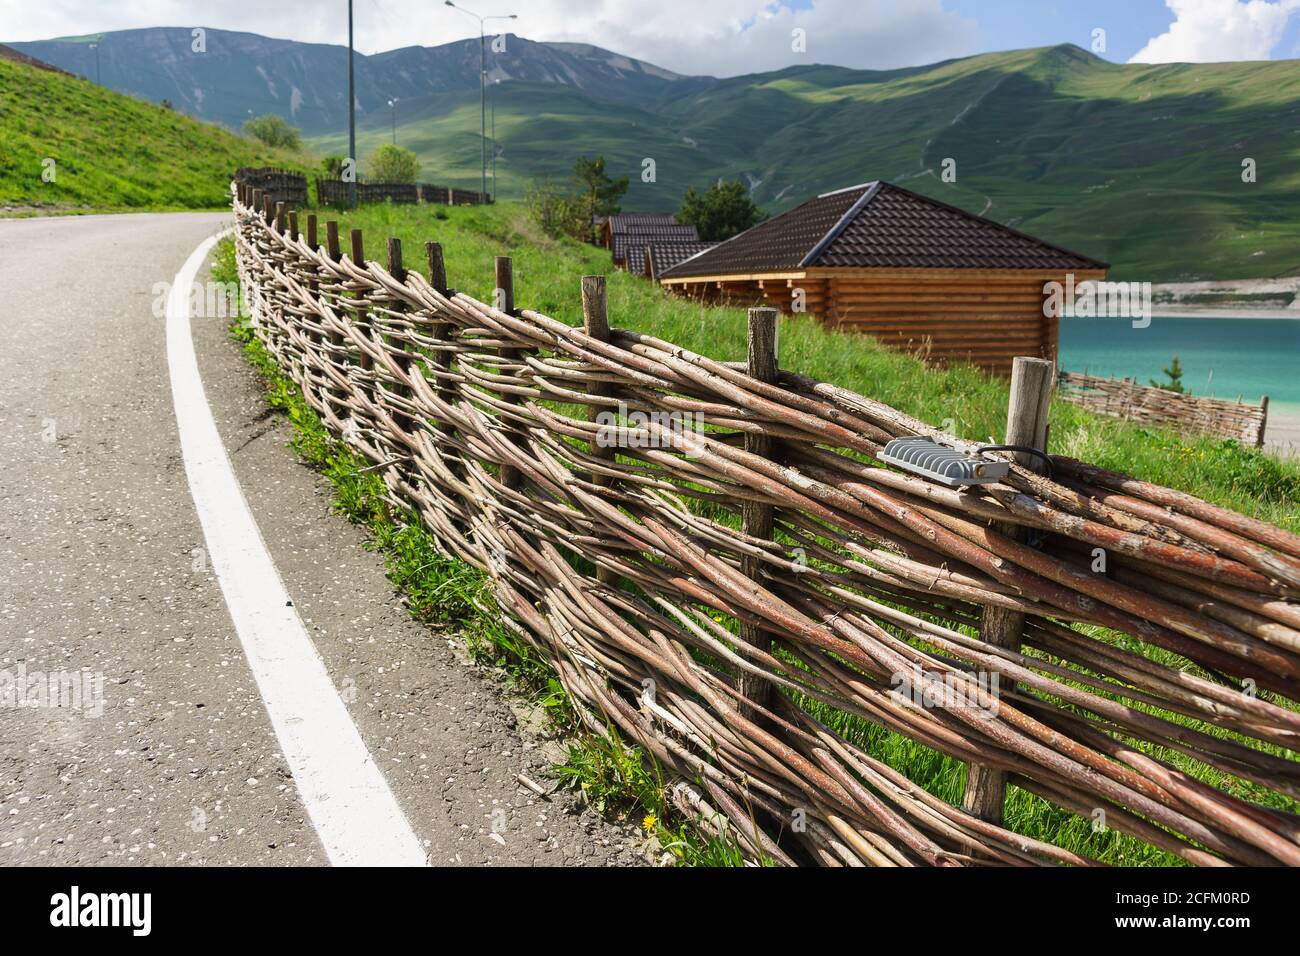 Vedensky district, Chechen Republic, Russia - June 01, 2019: The original fence along the road of woven long branches. Ethnic decoration Stock Photo